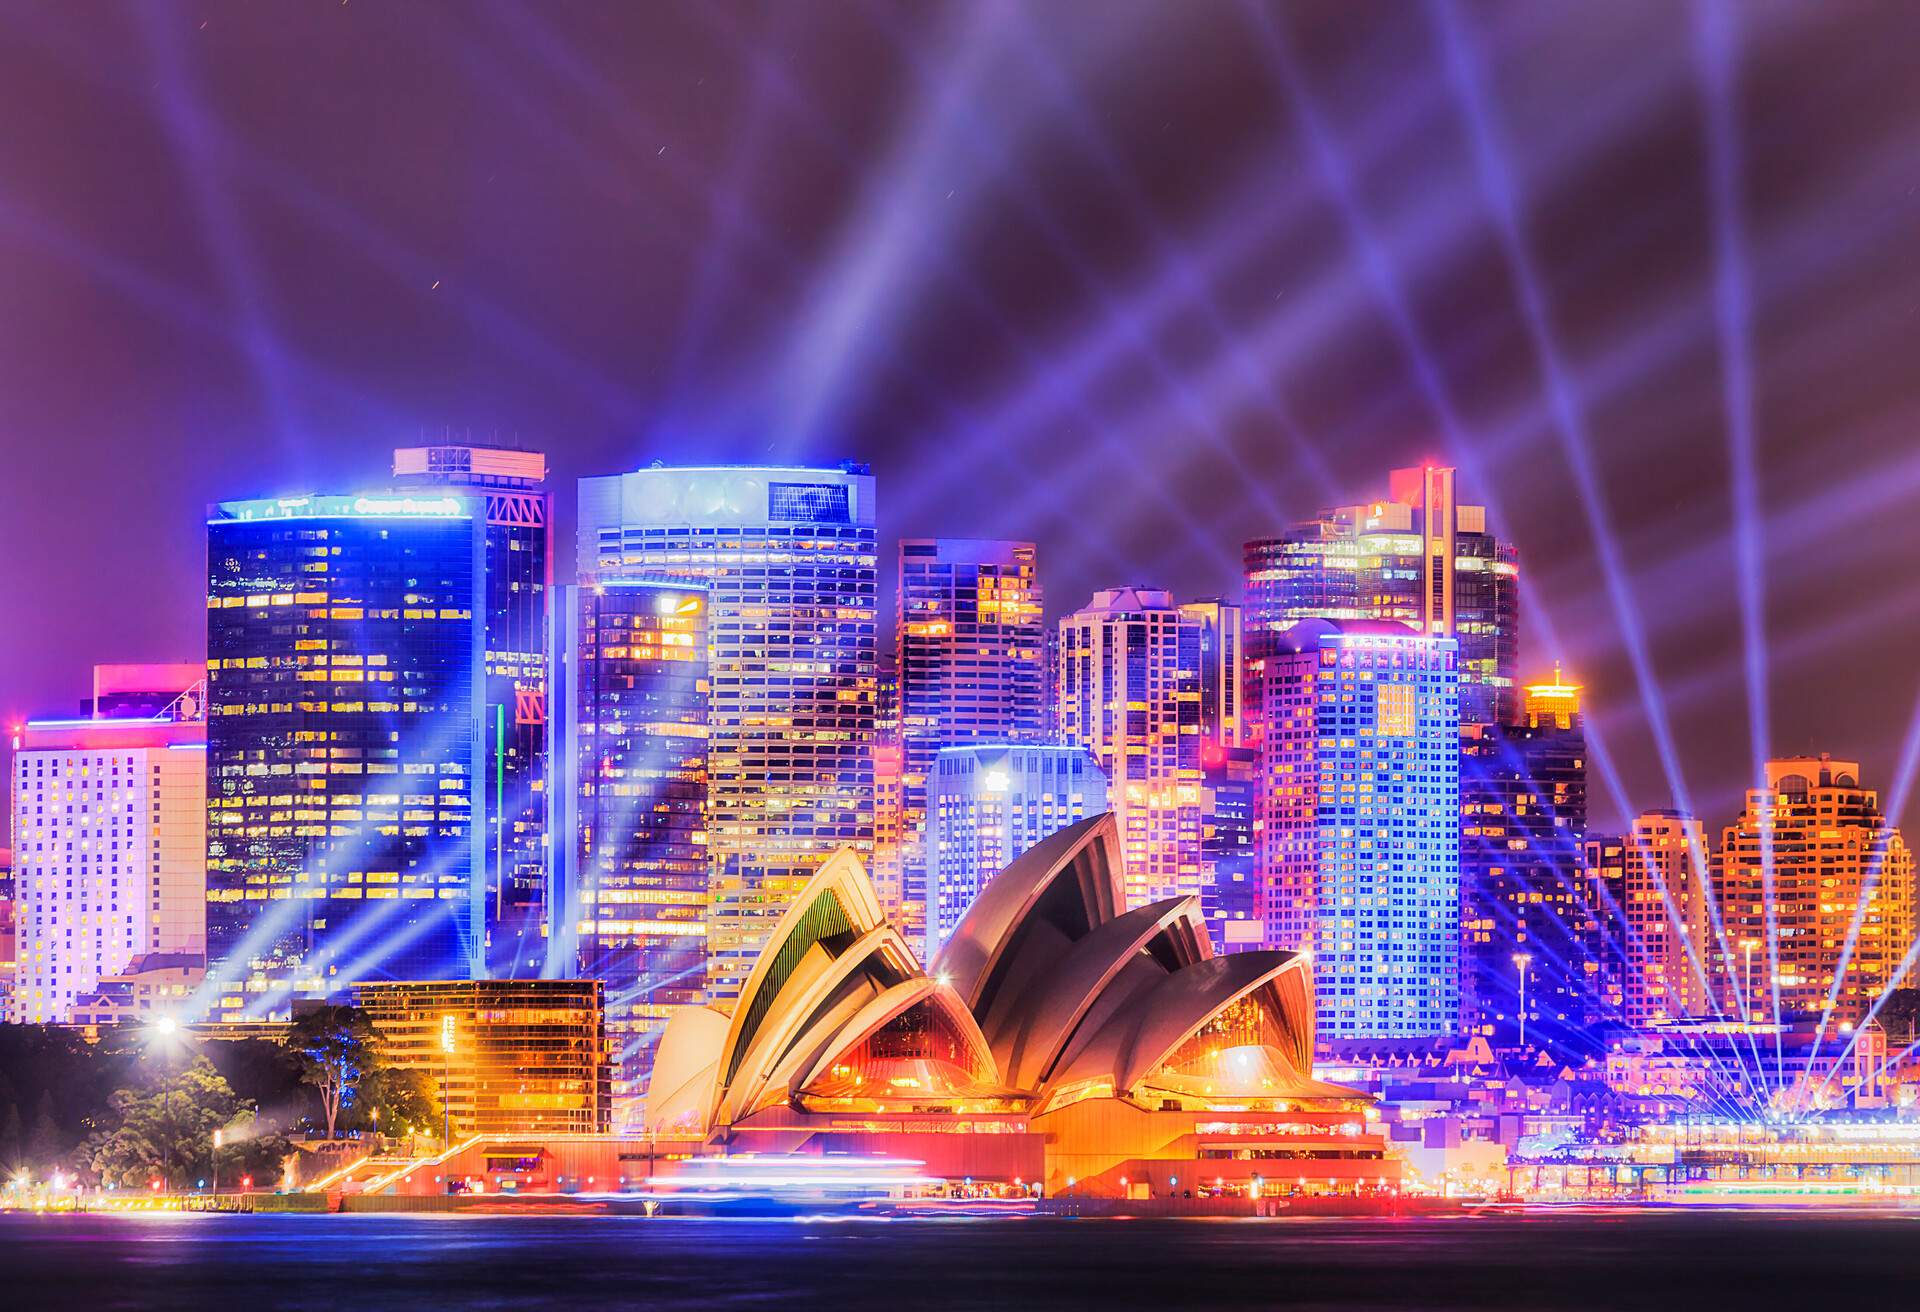 The Sydney Harbour skyline, including the Sydney Opera House , bathing in a kaleidoscope of brilliant night lights.